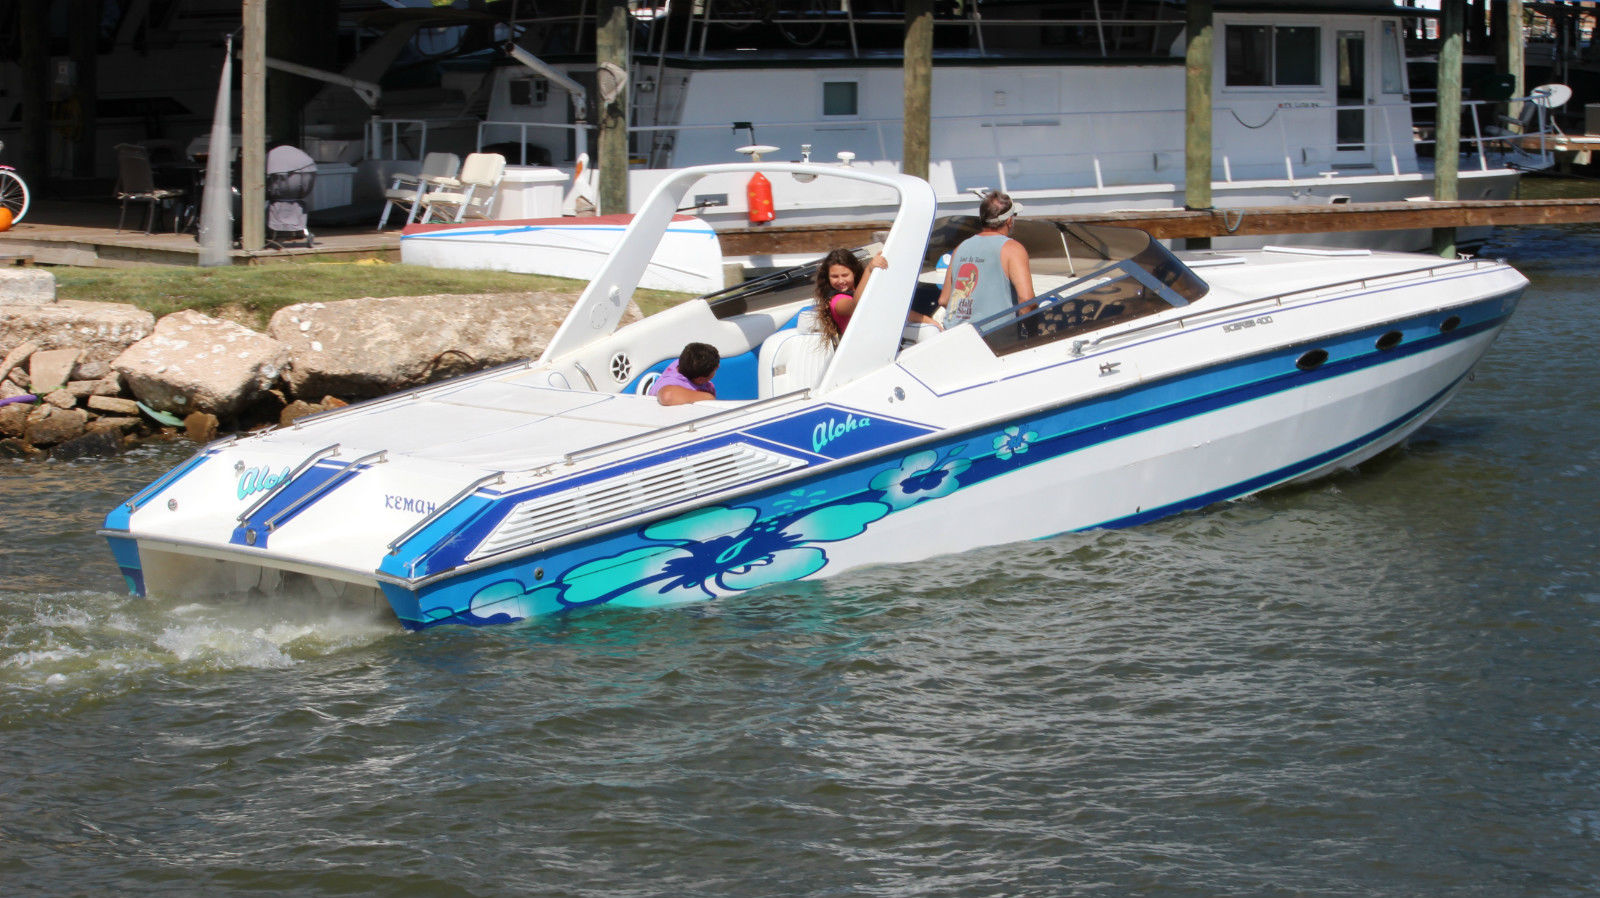 Wellcraft Scarab 400 1986 for sale for $20,000.